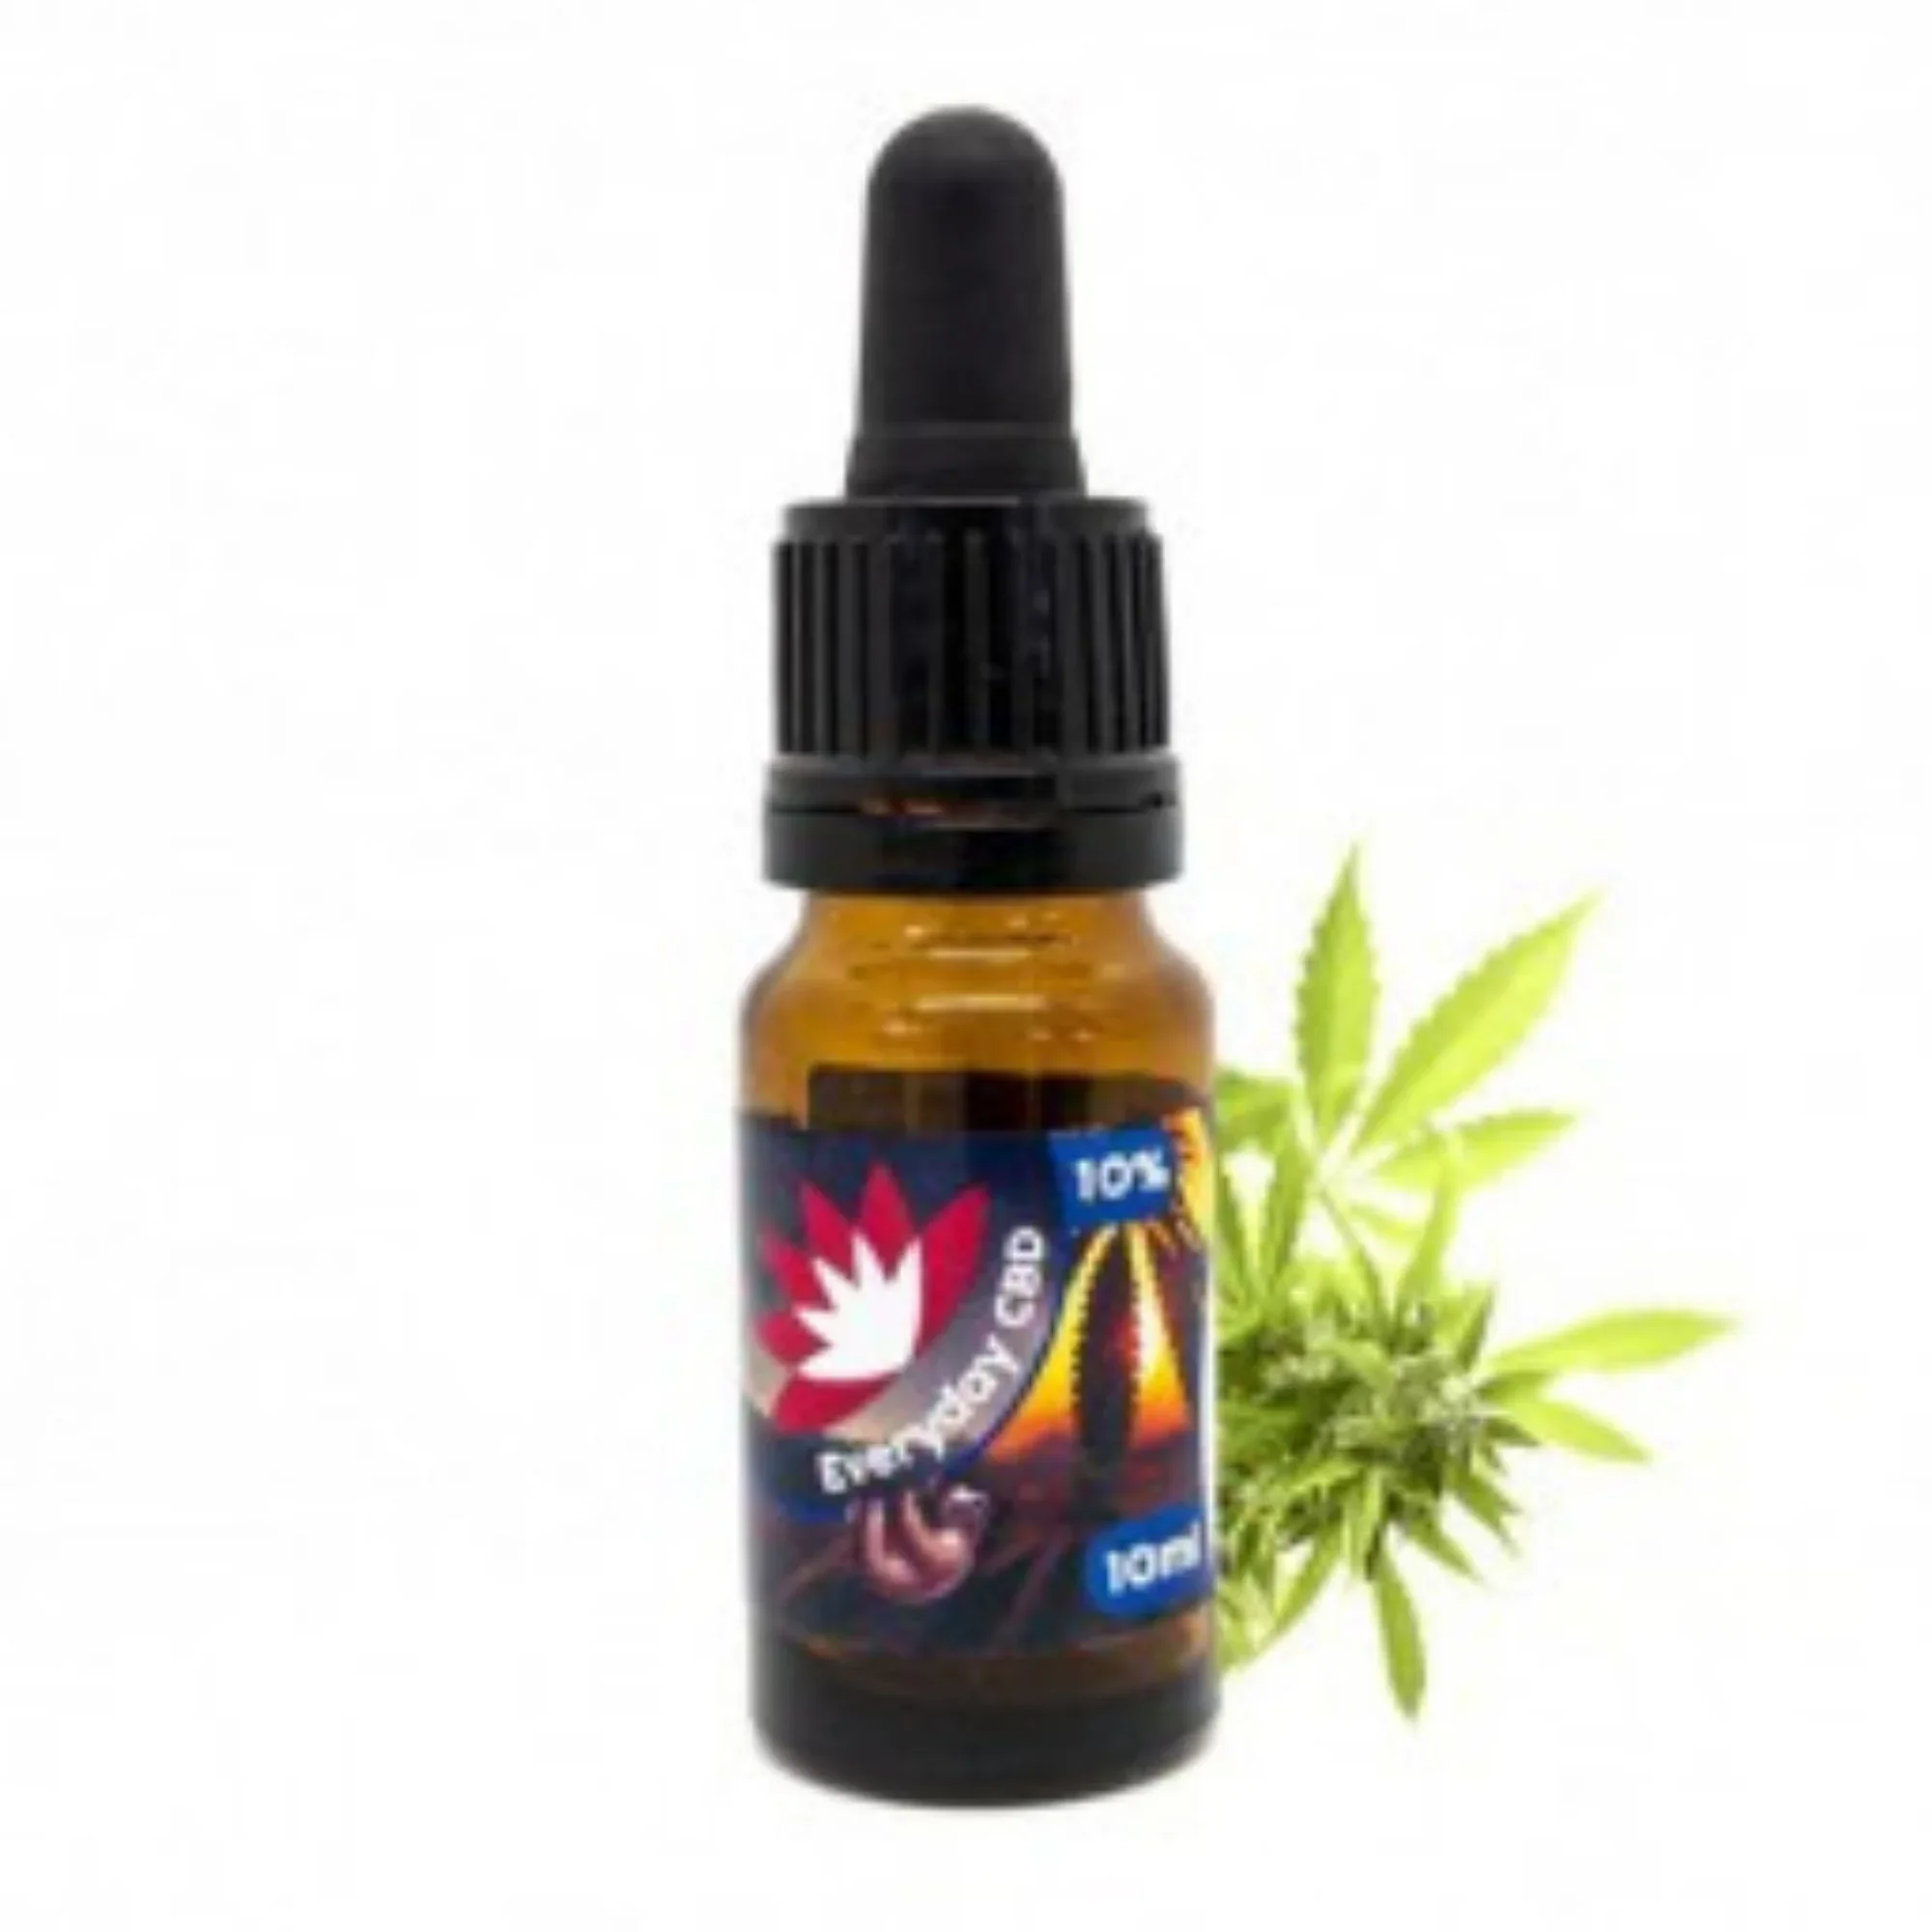 Microdose - CBD Oil 10% 'Nights Rest' or 'Energy and Vitality'